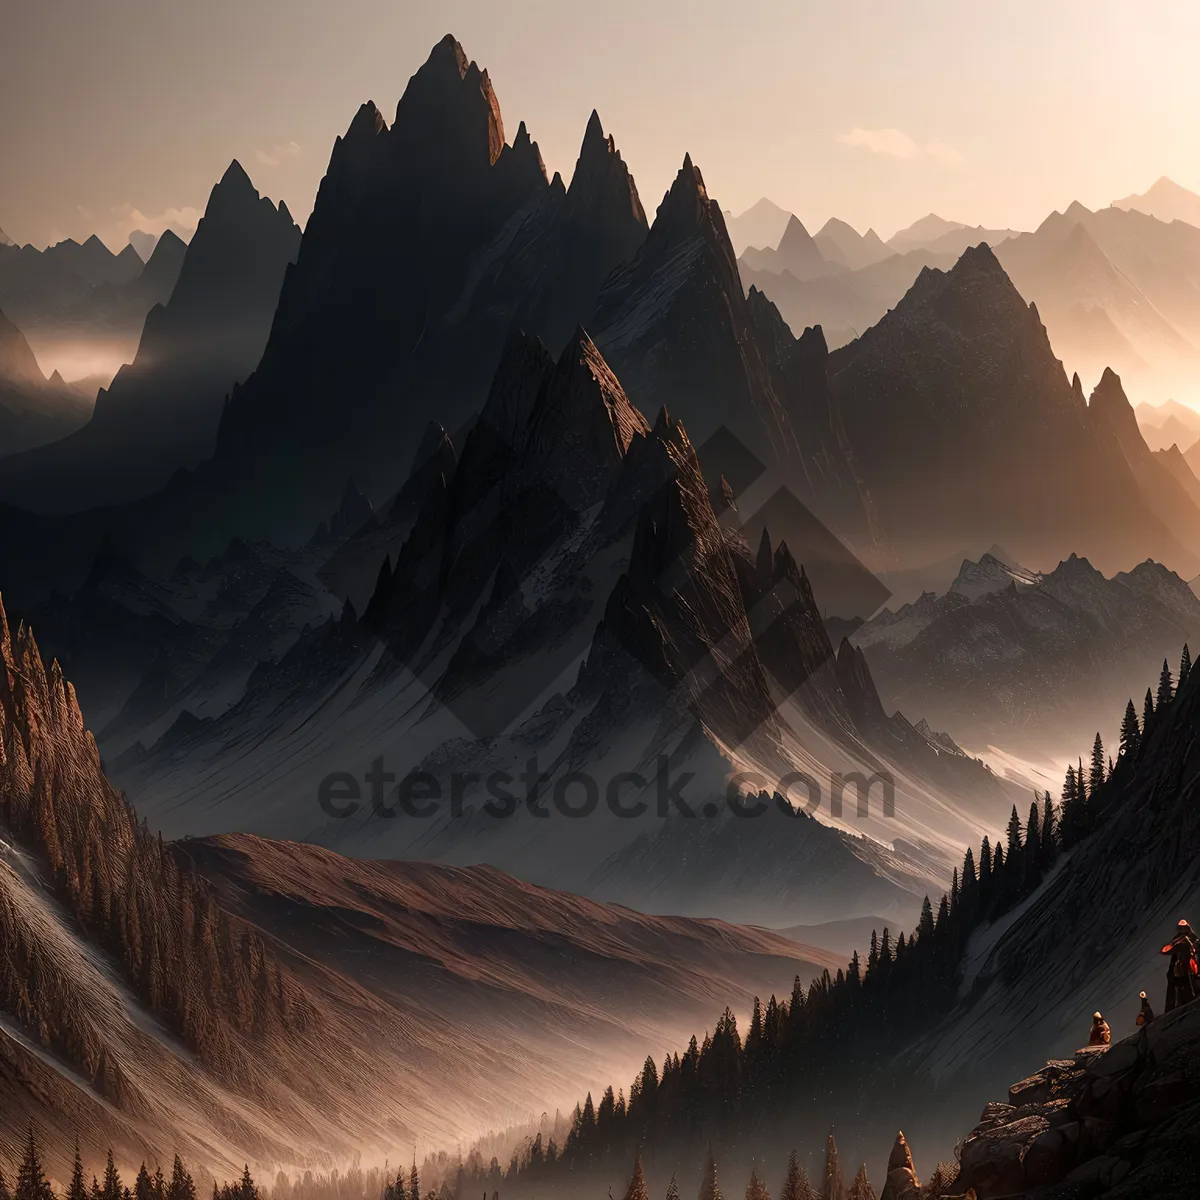 Picture of Snow-capped Peak Surrounded by Majestic Alpine Landscape